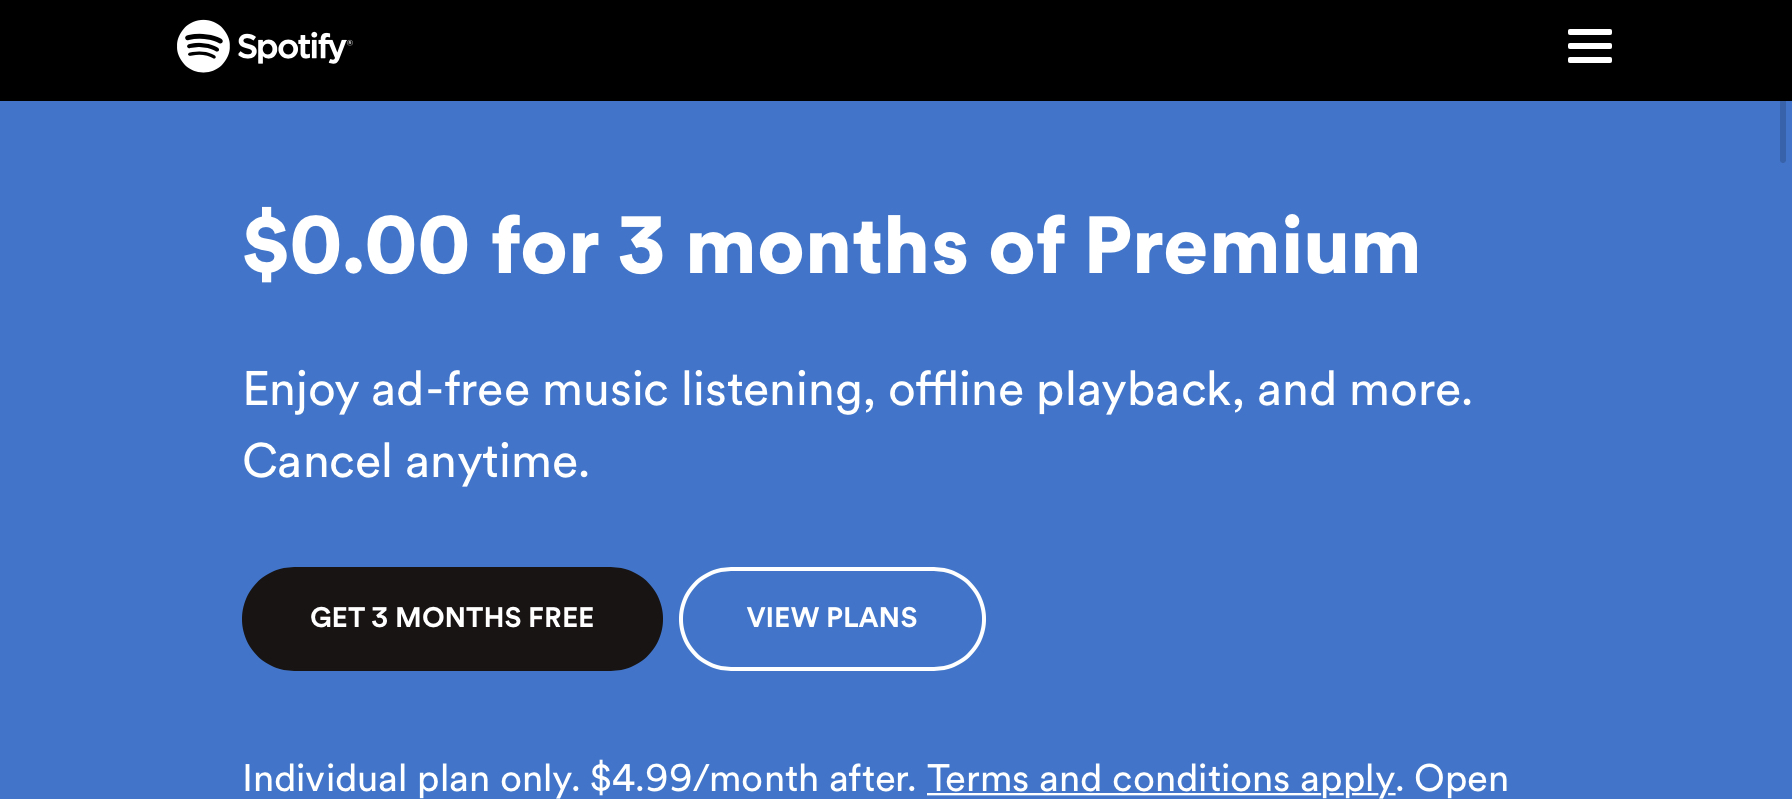 $0 for a 3-month Premium subscription: Spotify has launched a promotion to  attract new users